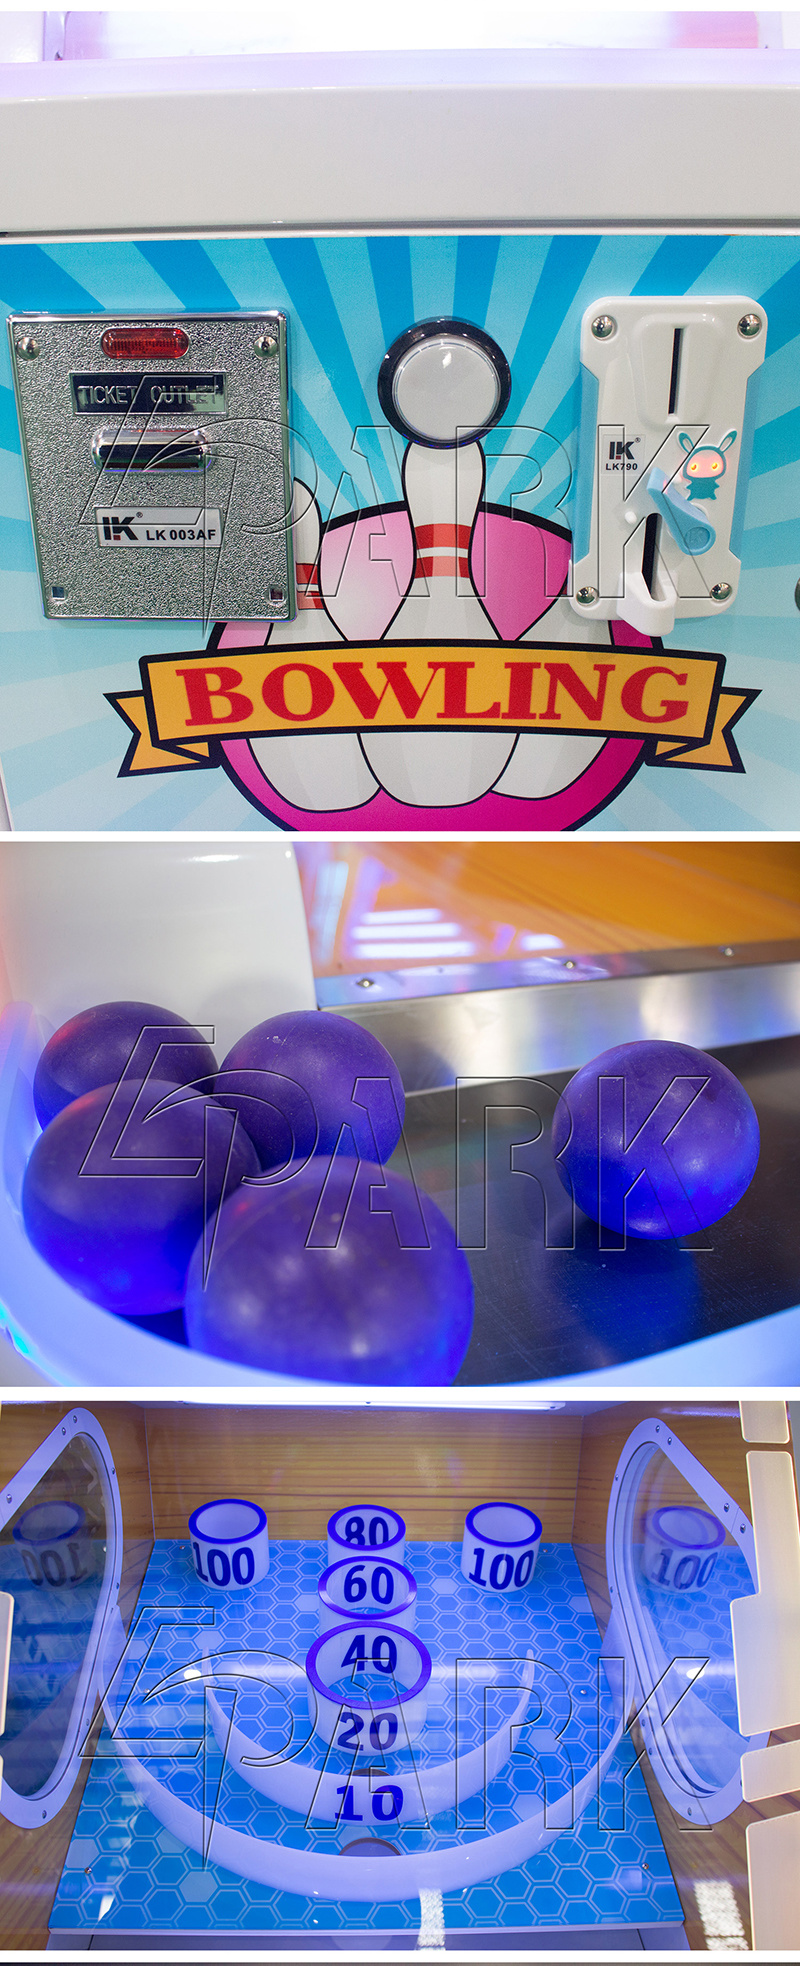 Happy Bowling Epark Lunch Ball Coin Operated Game Machine for Sale